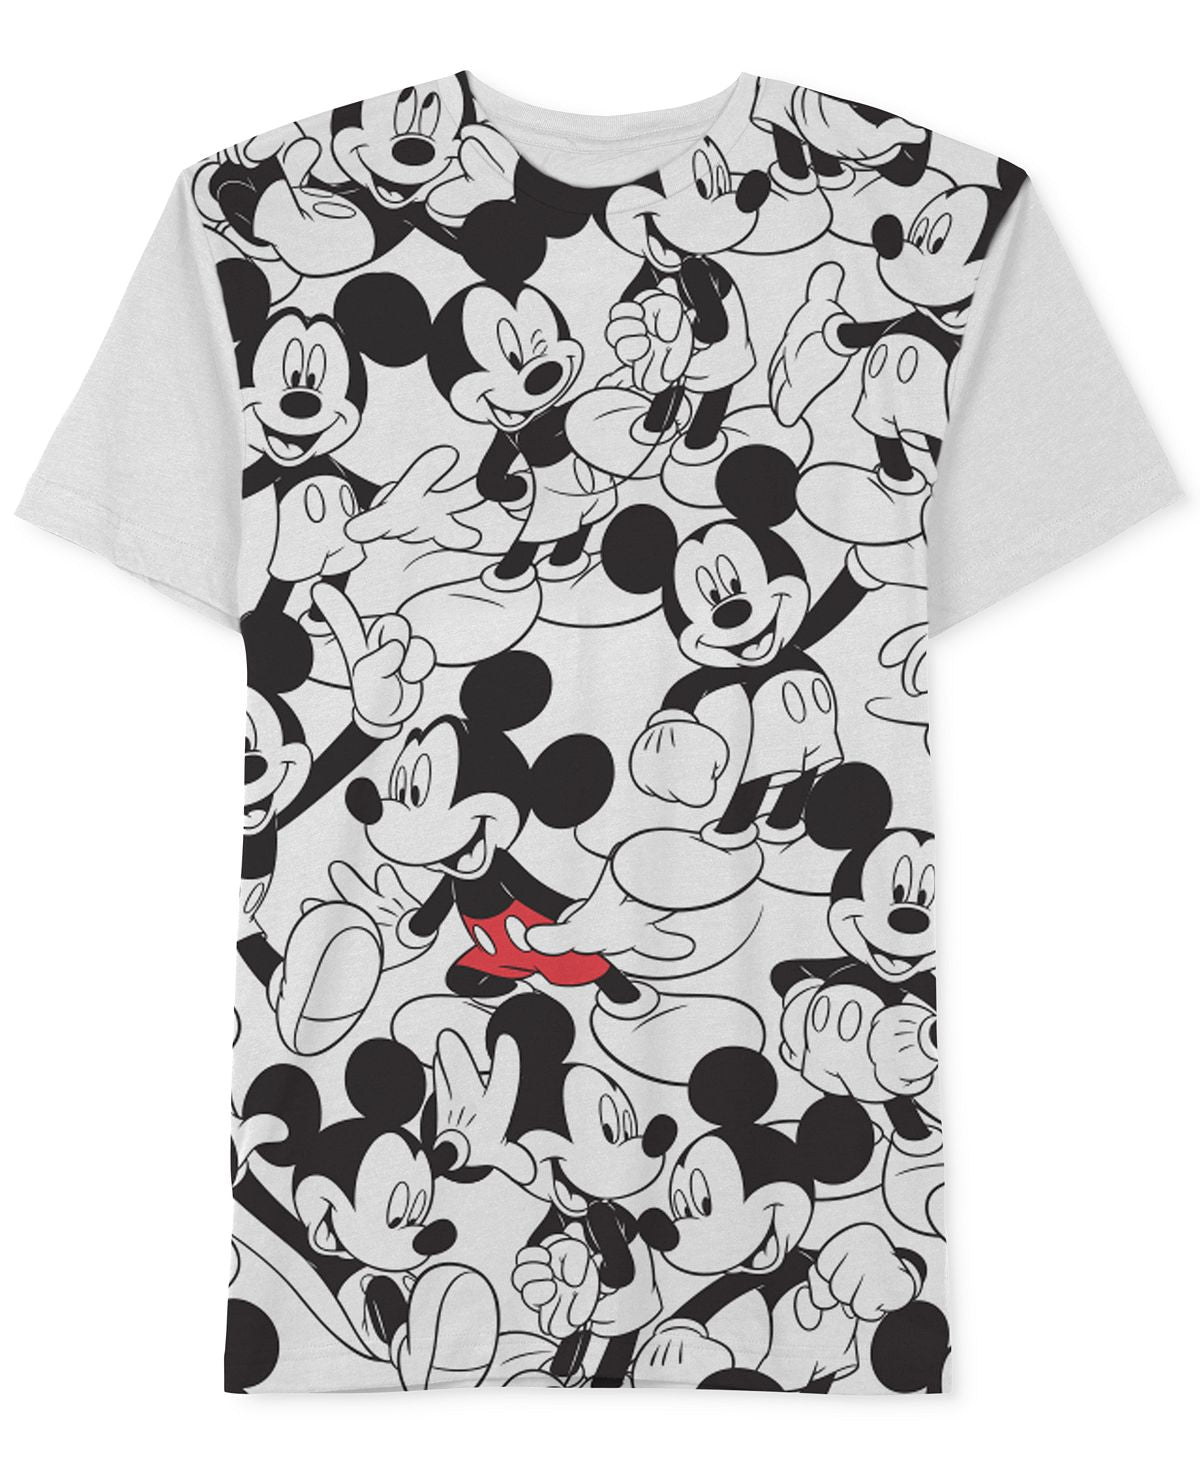 Jem Repeating Mickey Mouse T-shirt By White